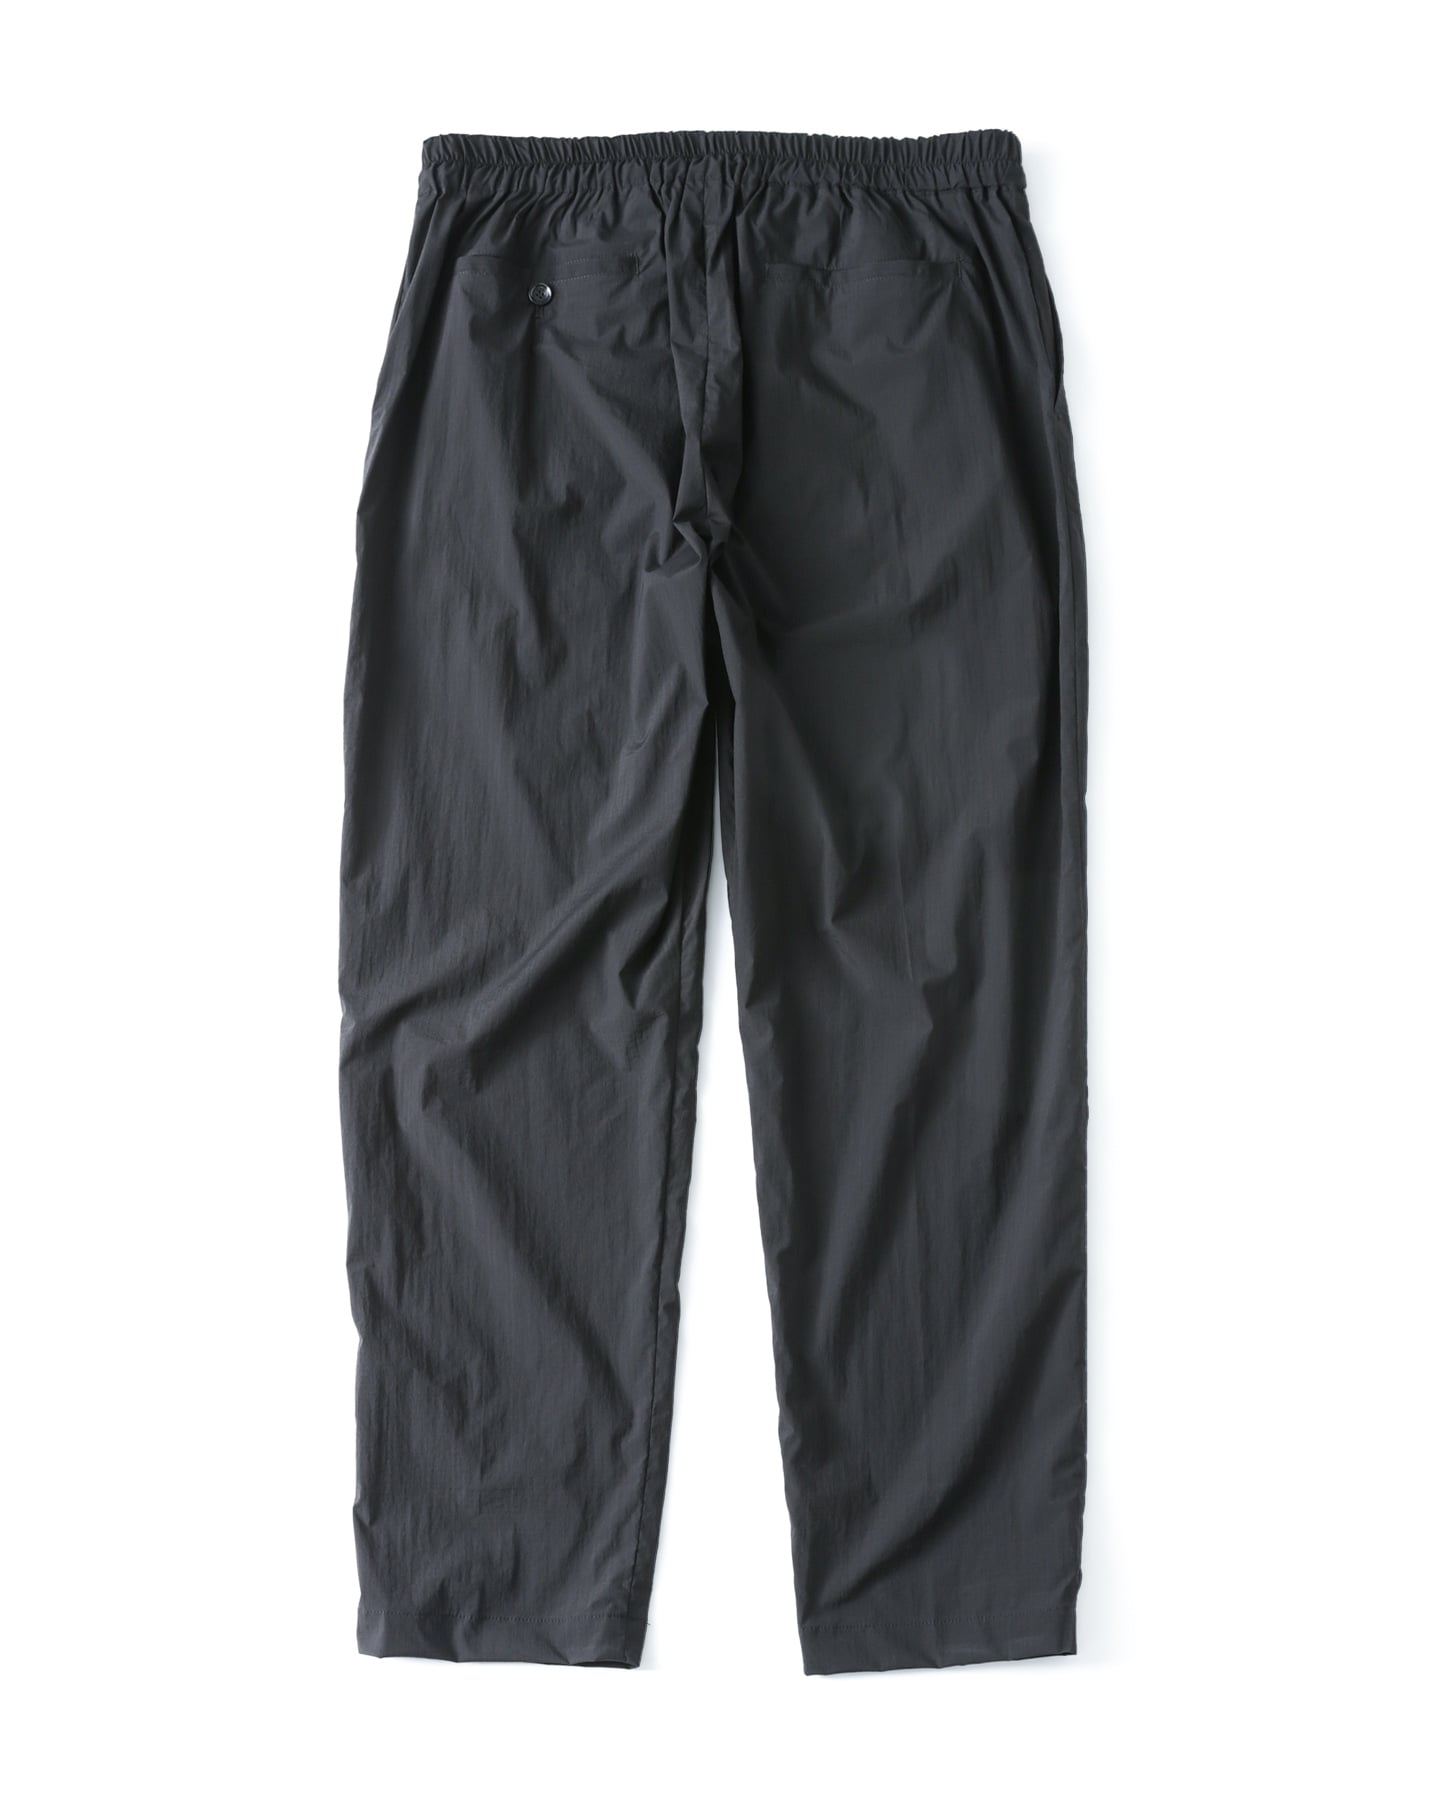 LIGHT WEIGHT STRETCH RIP STOP TAPERED EASY PANTS